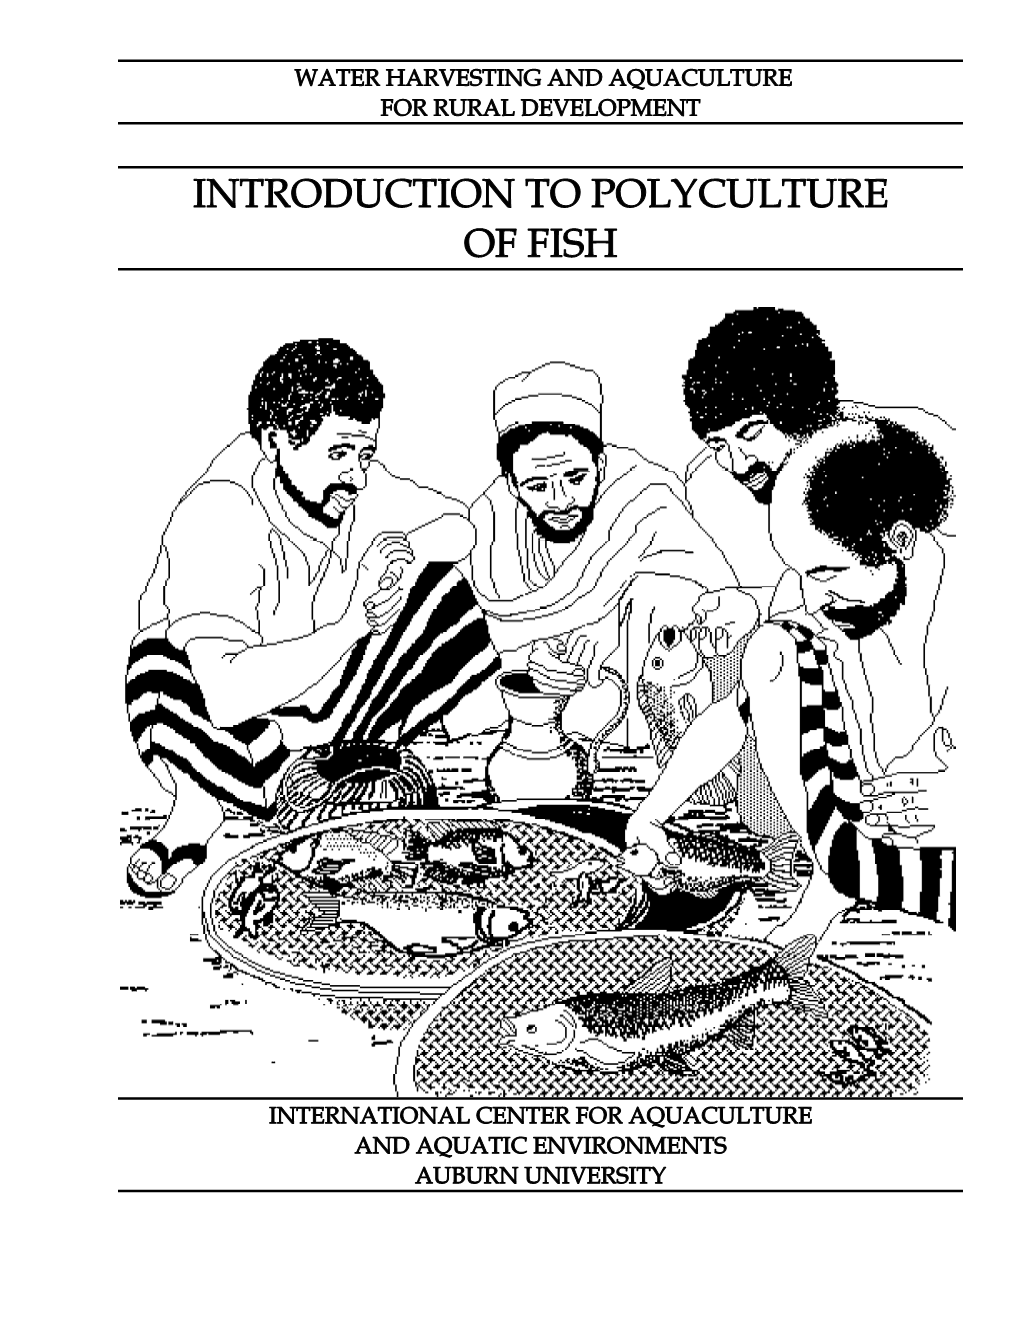 Introduction to Polyculture of Fish